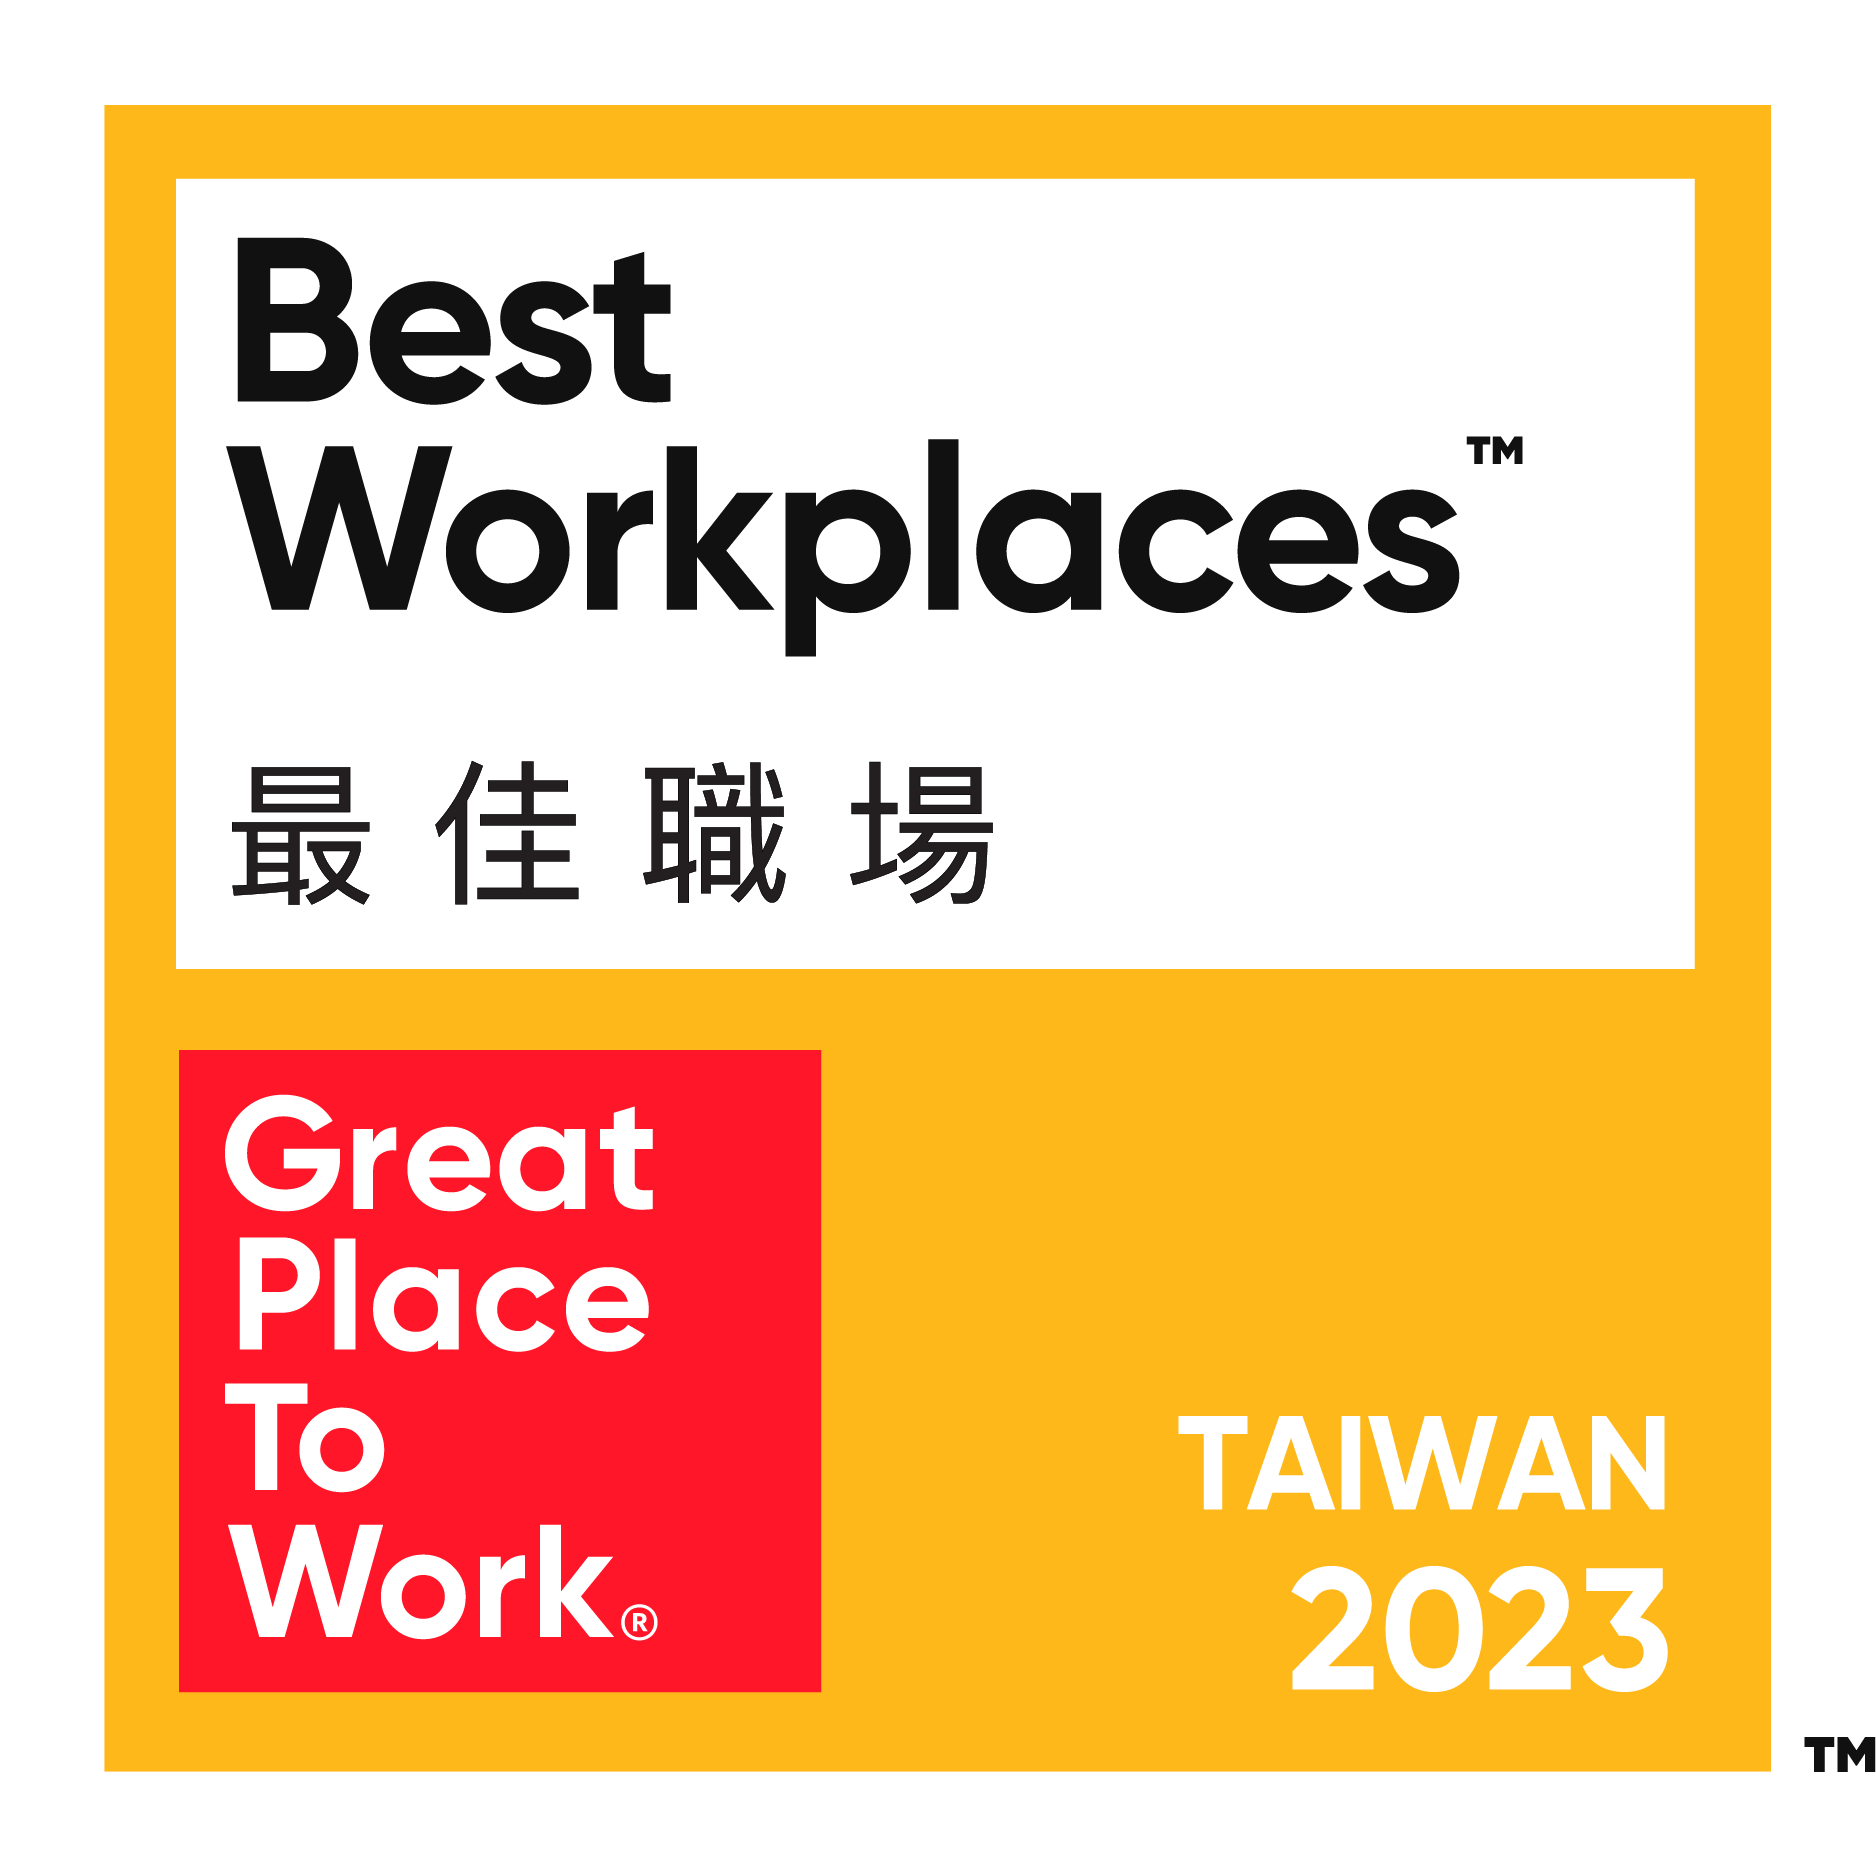 Best Workplaces in Taiwan 2023